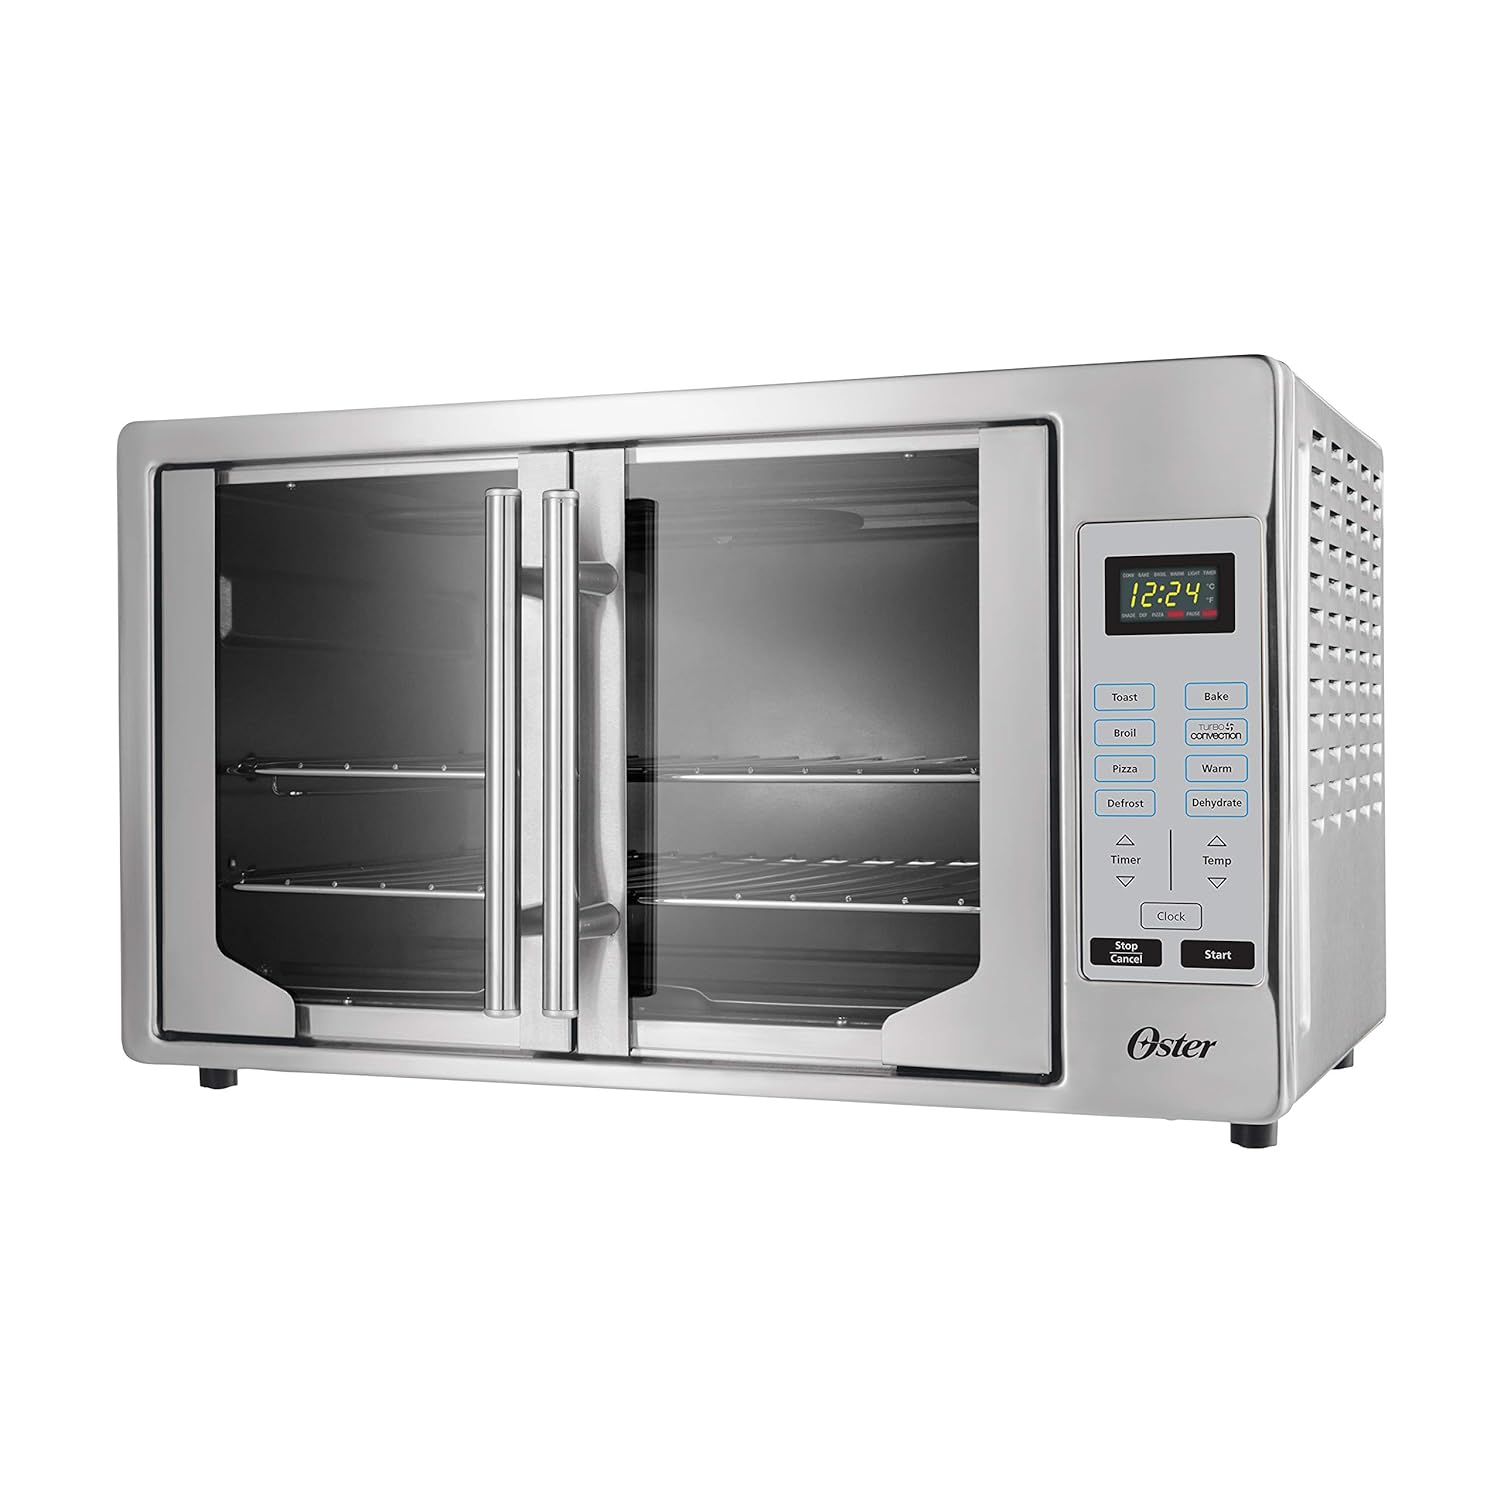 GCP Products GCP-US-561264 Convection Oven, 8-In-1 Countertop Toaster Oven,  Xl Fits 2 16 Pizzas, Stainless Steel French Door